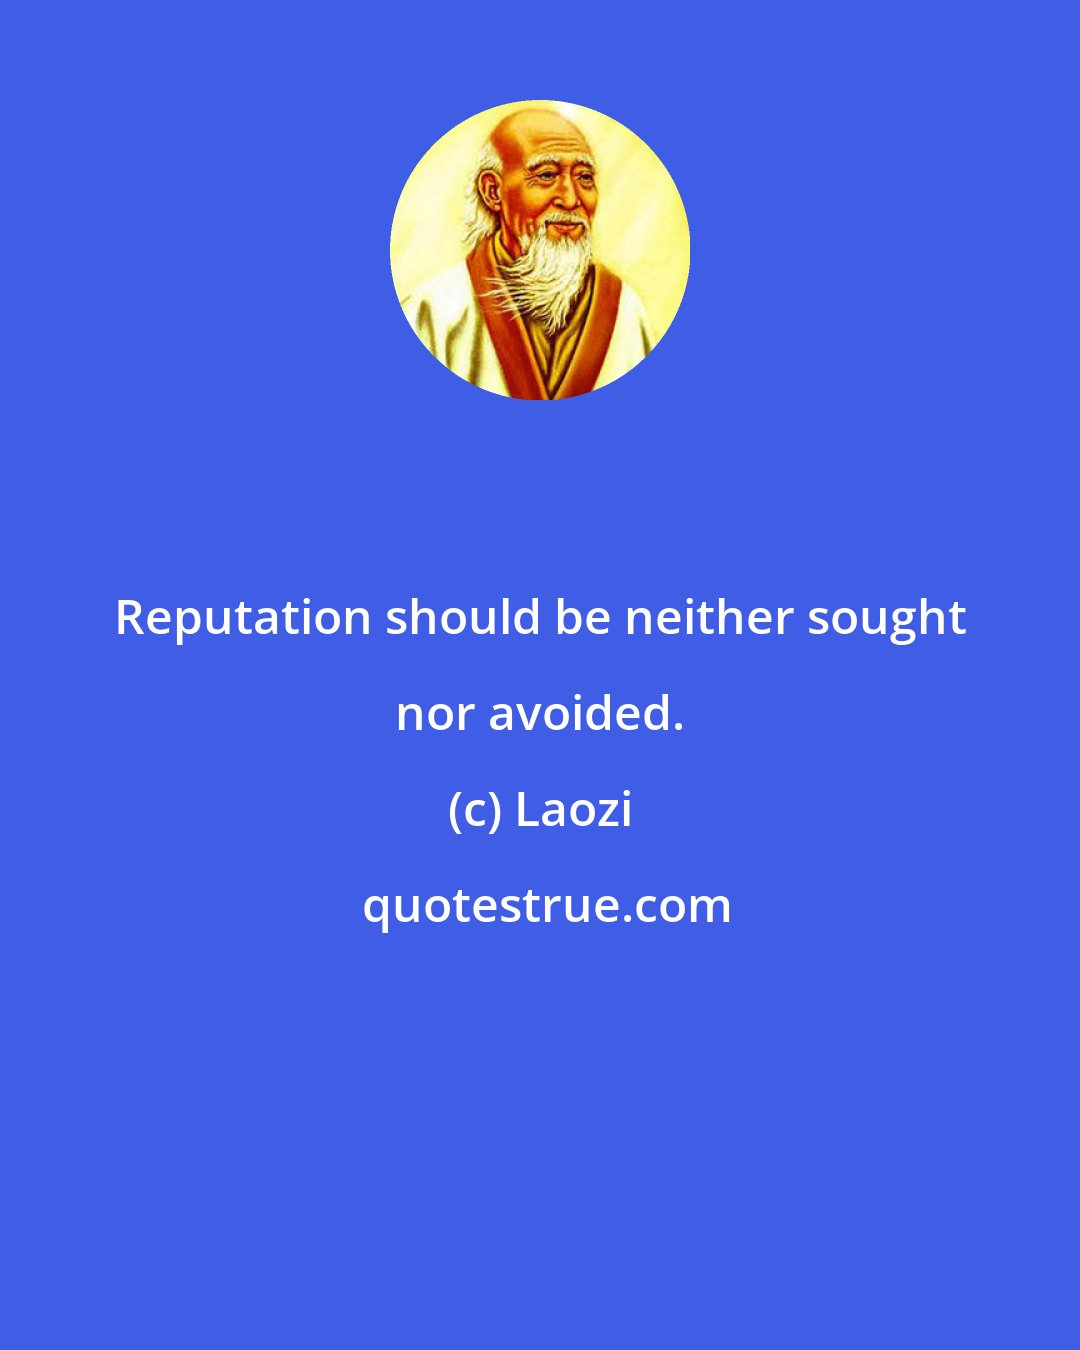 Laozi: Reputation should be neither sought nor avoided.